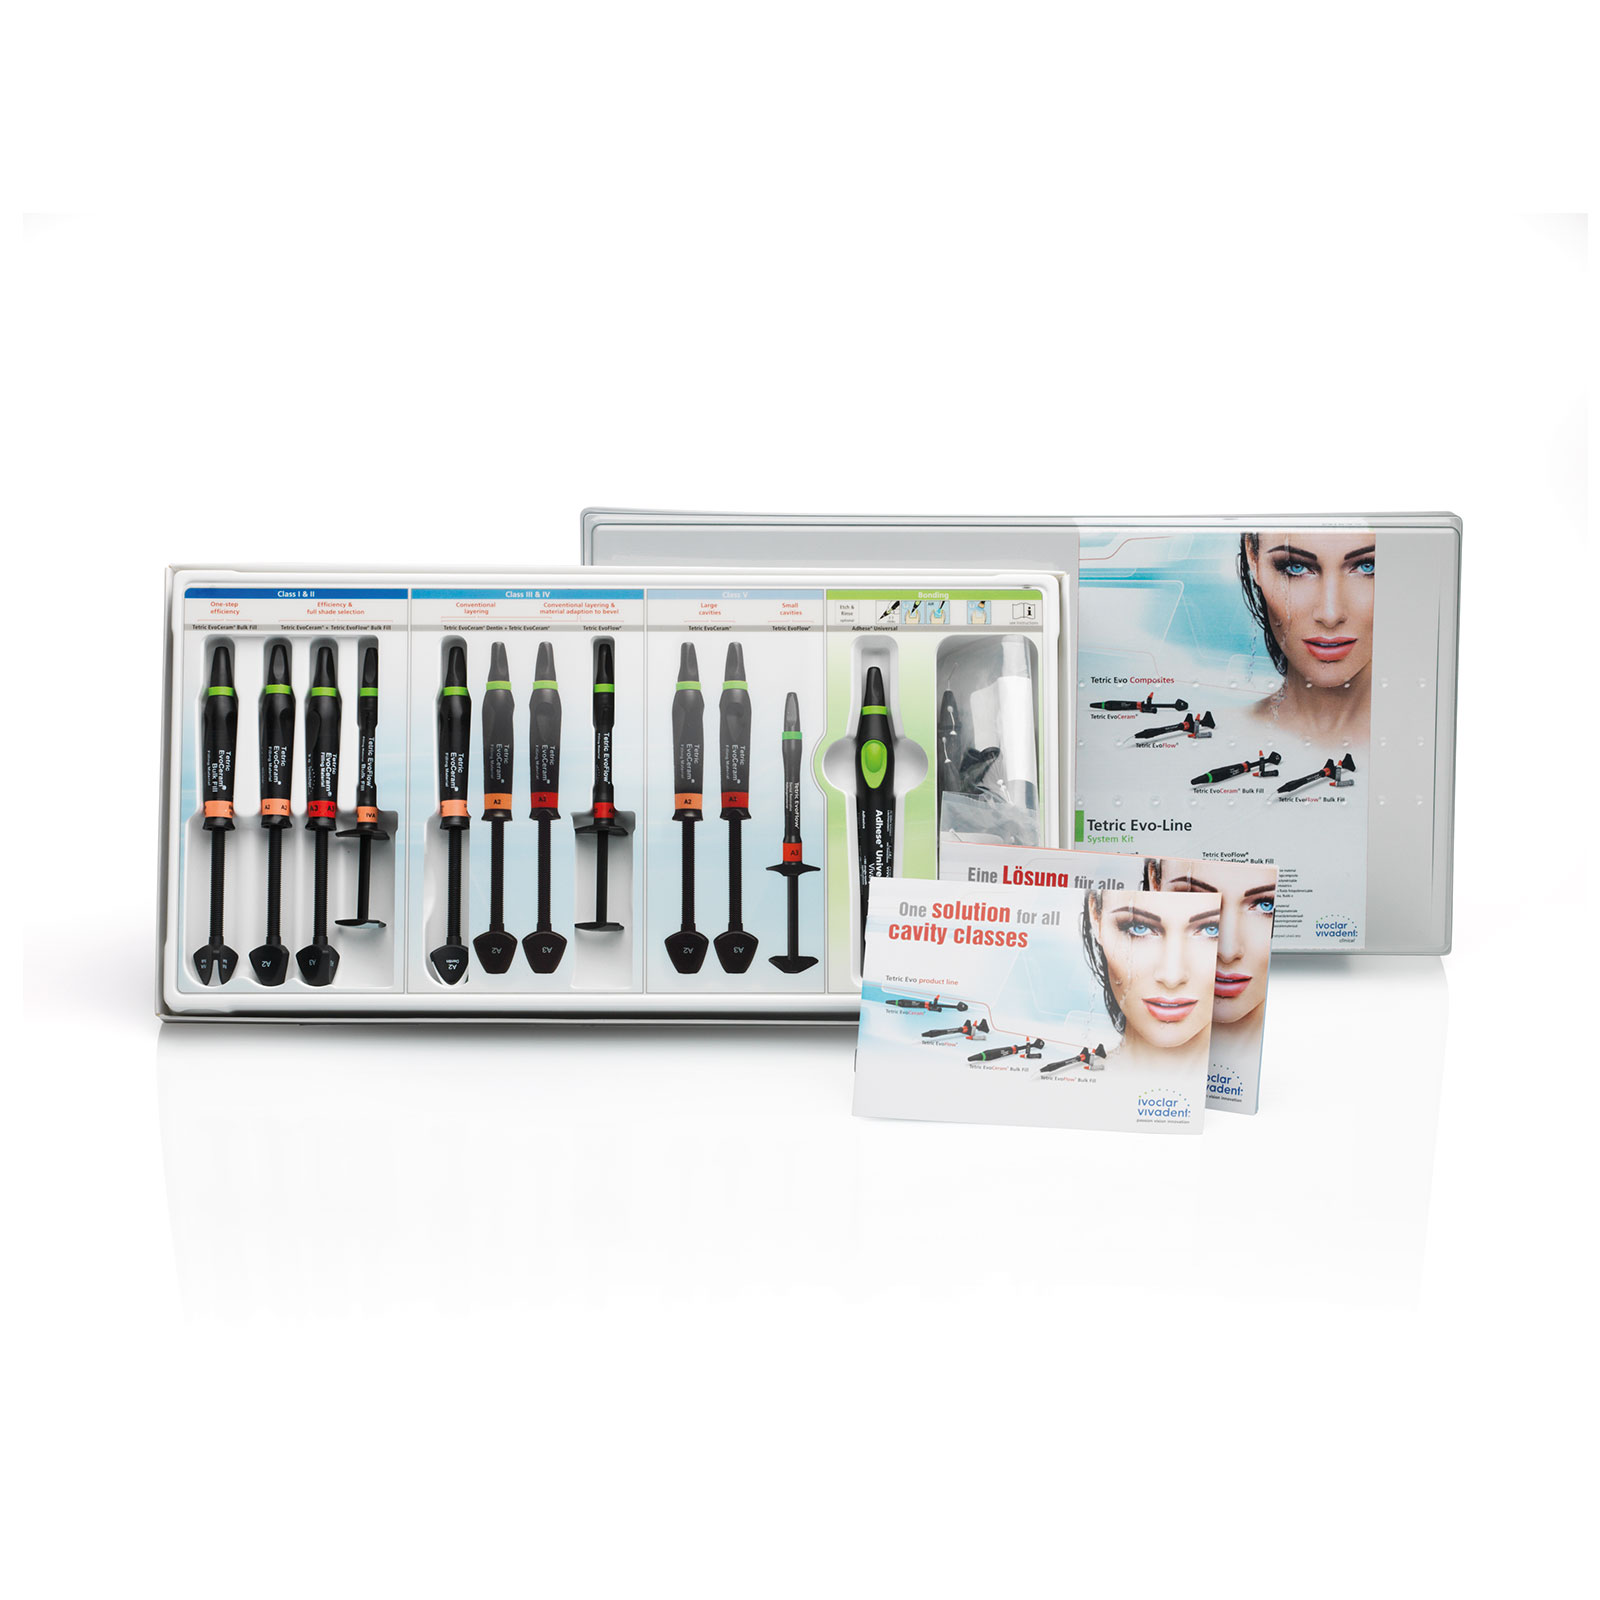 TETRIC N-COLLECTION SYSTEM KIT. IVOCLAR